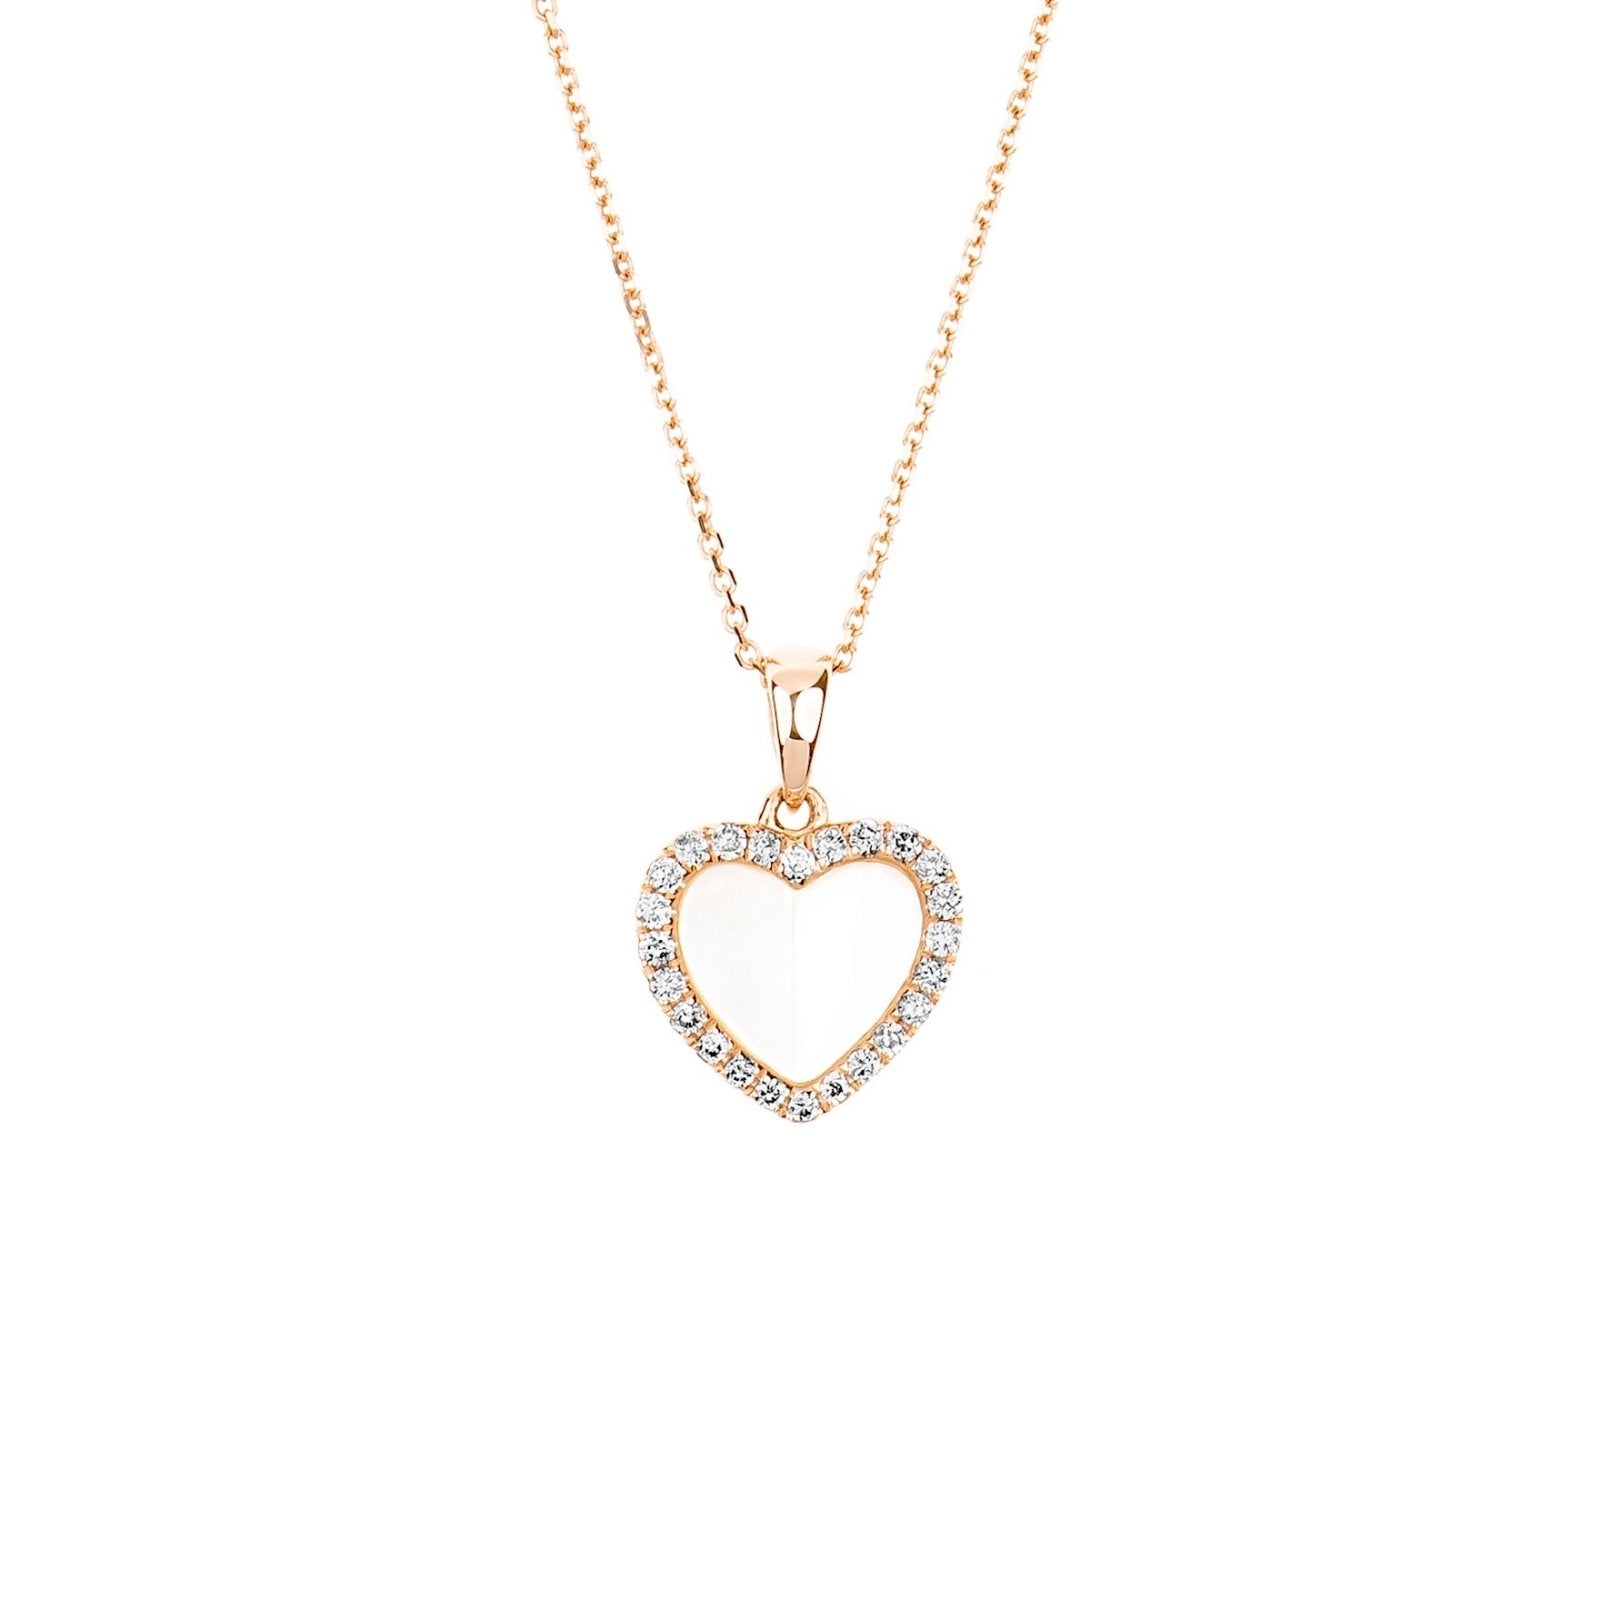 Mother of Pearl Heart with Diamond Halo Pendant Necklace Necklaces Estella Collection 17212 14k Birthstone Diamond #tag4# #tag5# #tag6# #tag7# #tag8# #tag9# #tag10# 14K Rose Gold